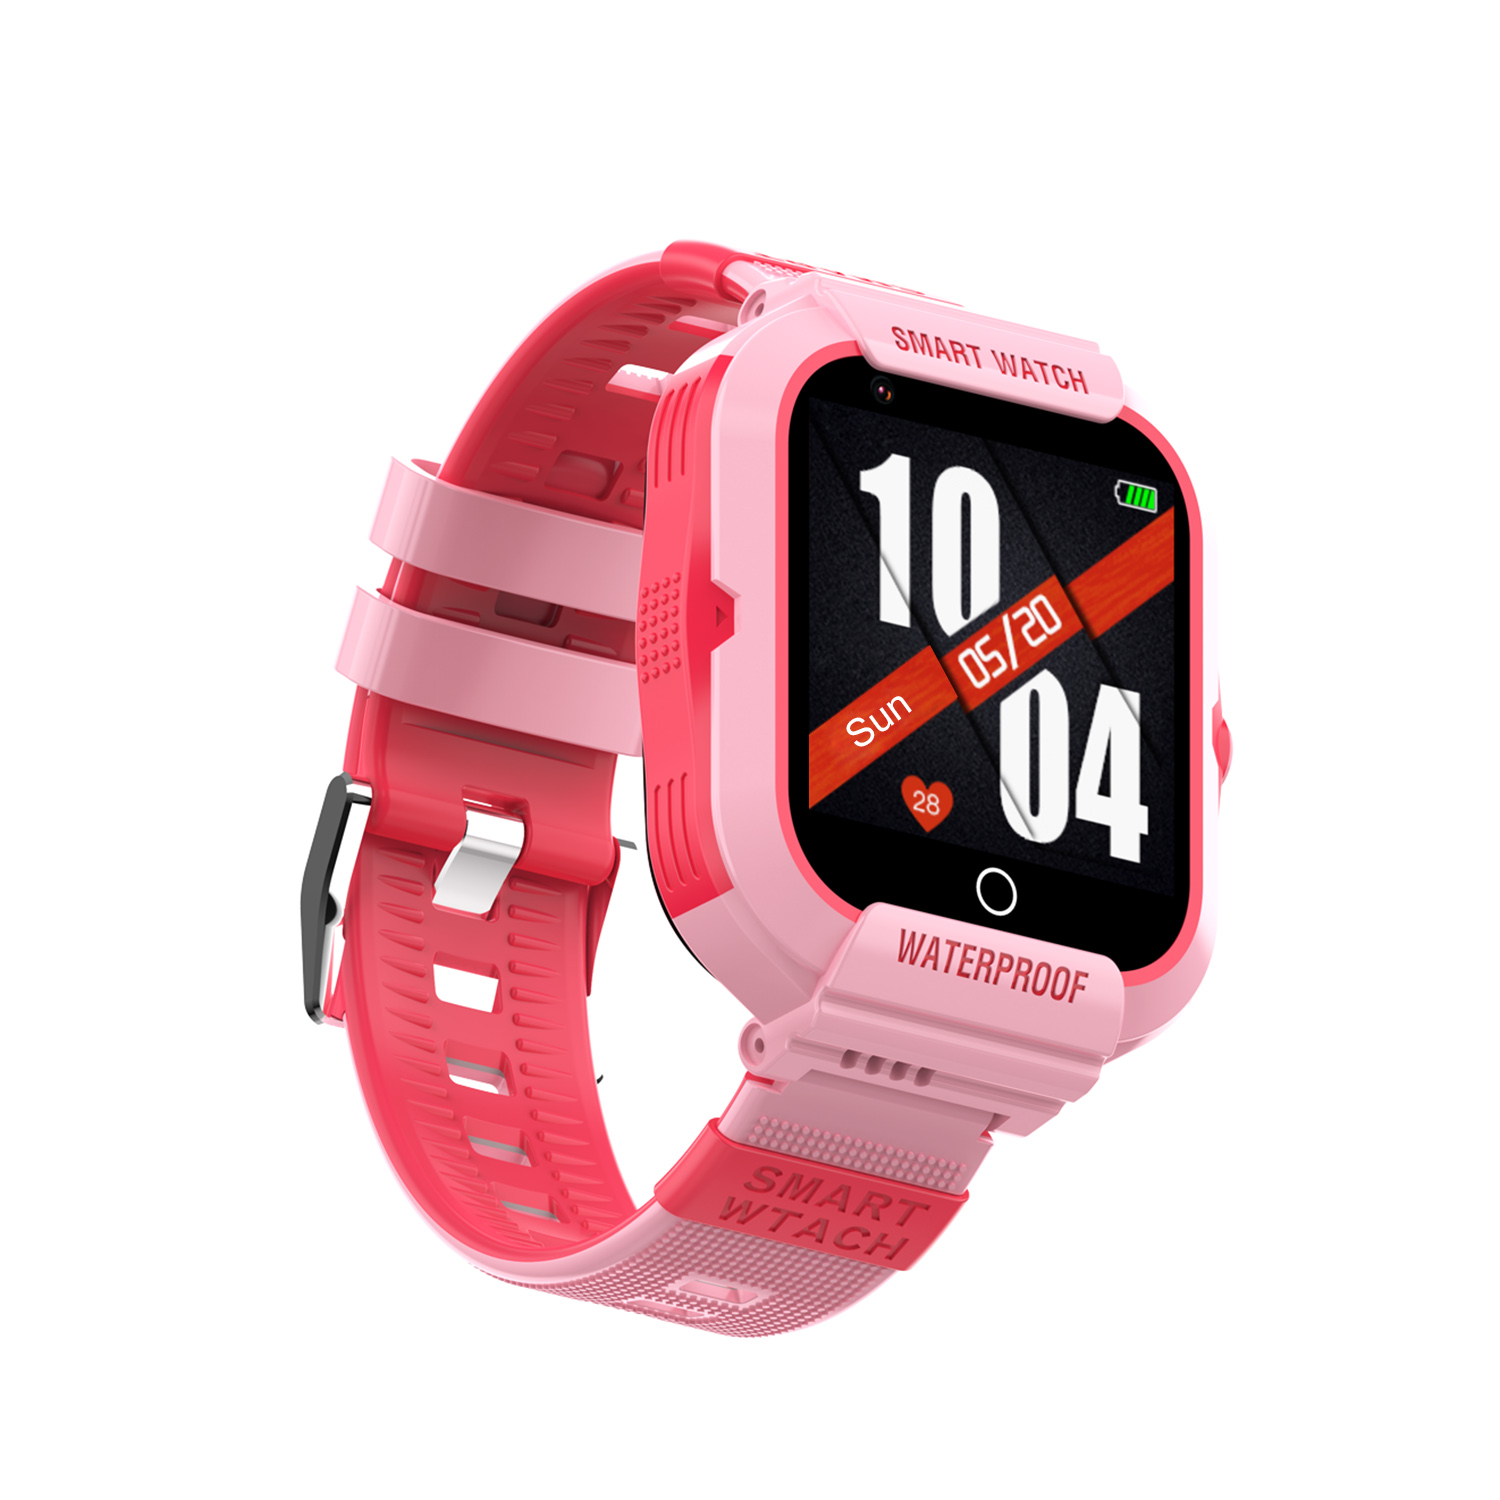 Best selling CE ROHS Approved 4G IP67 waterproof Kids GPS Smart watch with live map monitor video call for SOS help P42U